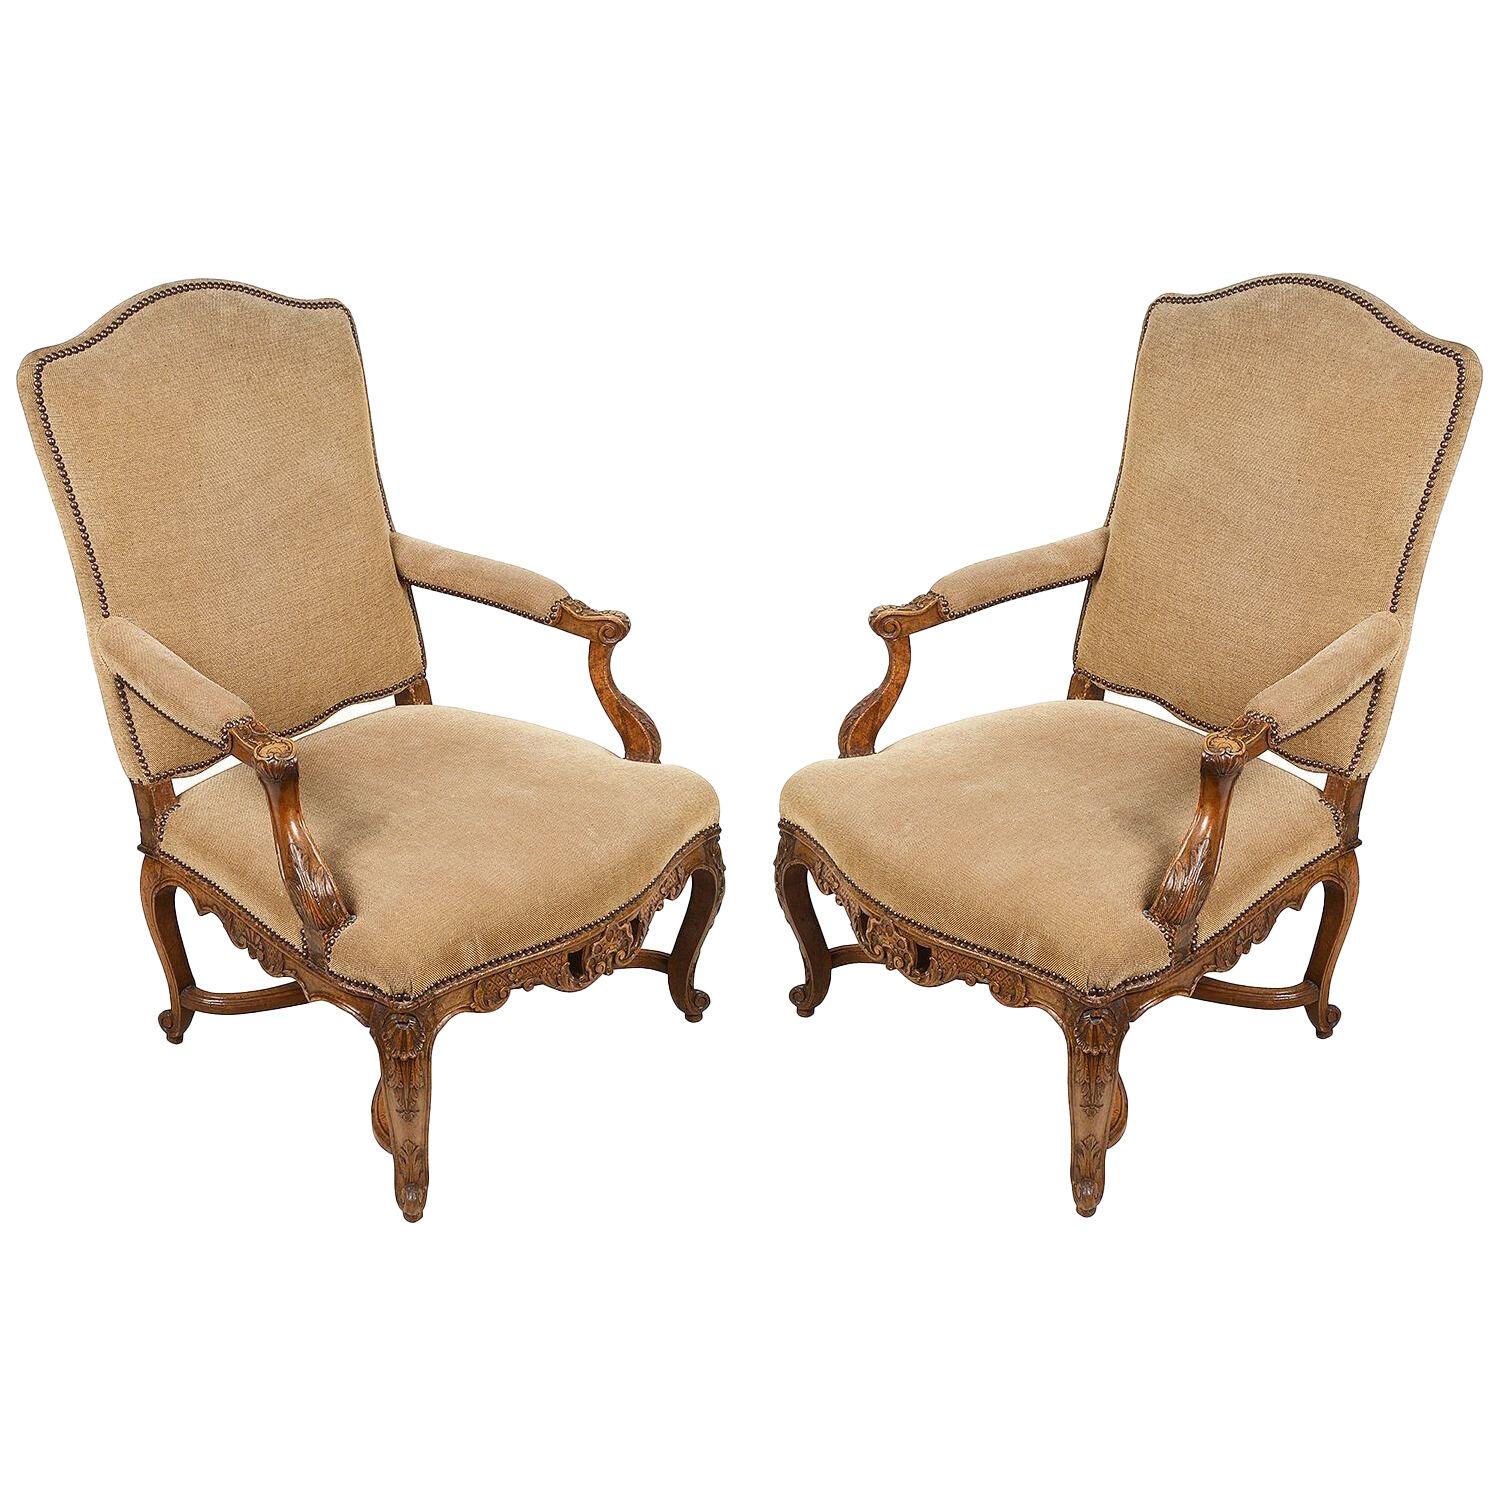 Pair 18th Century French Walnut Bergere arm chairs